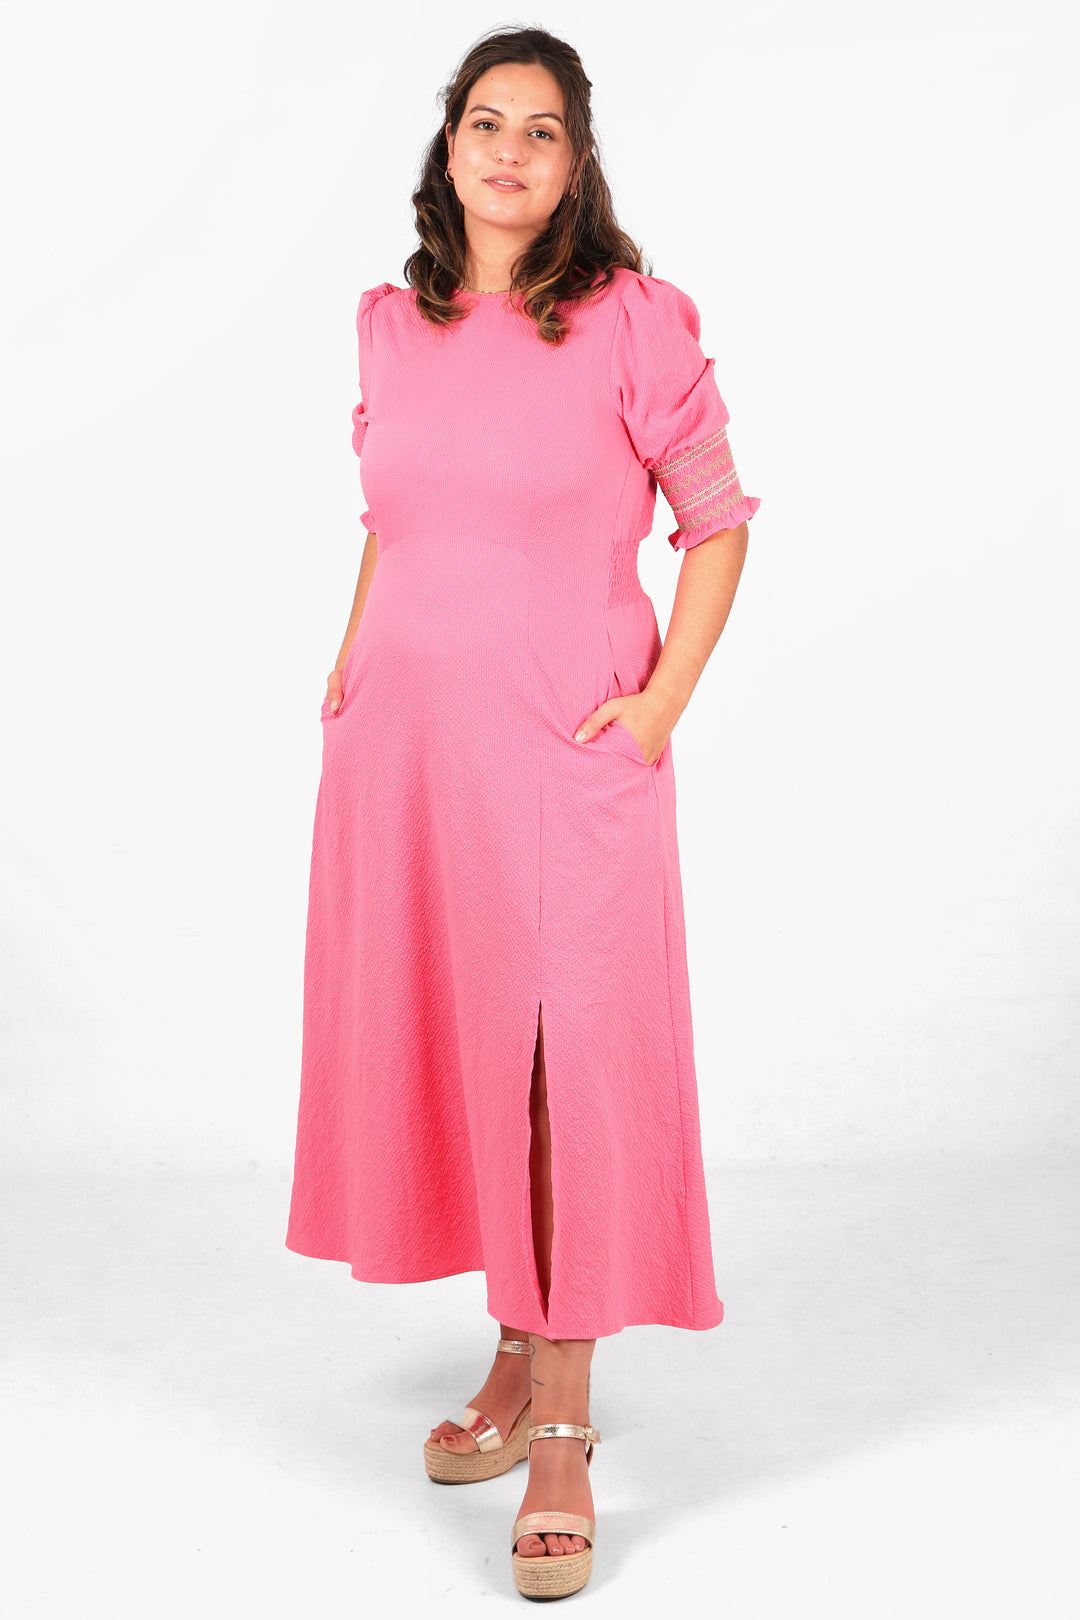 model showing that this pink textured tea dress has pockets